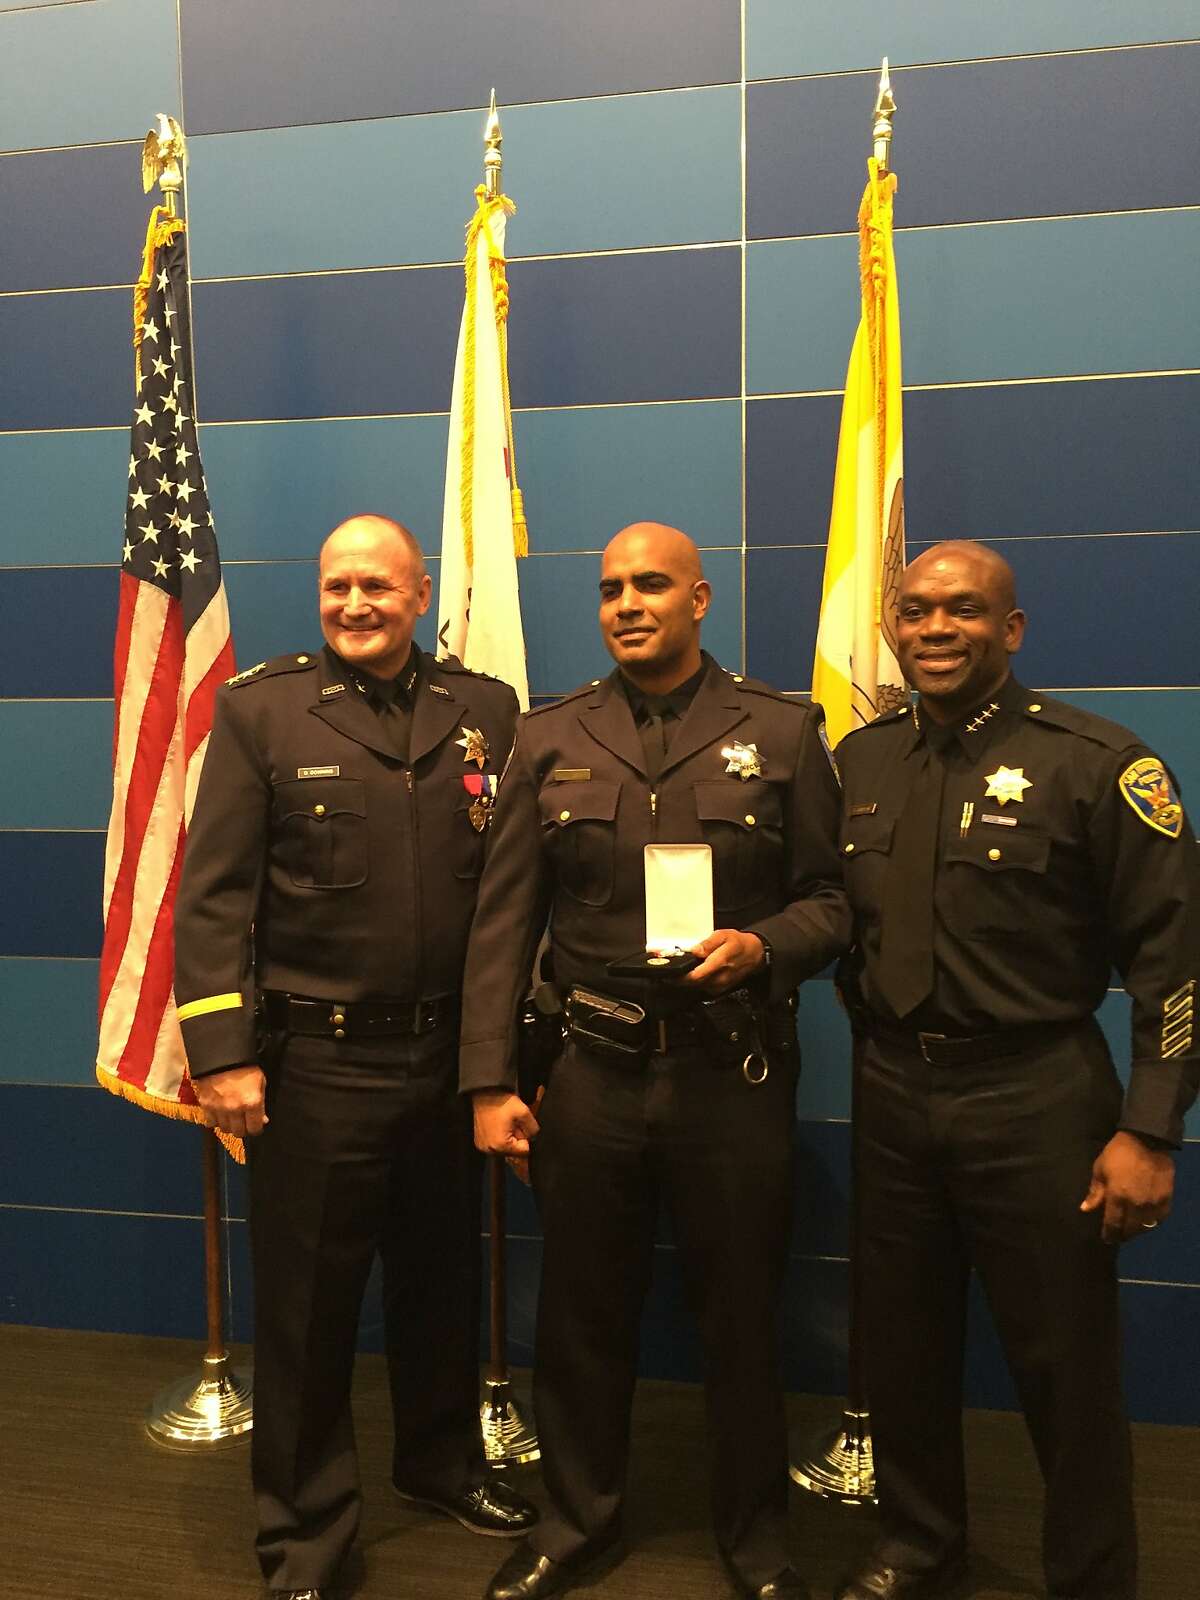 Off. Riley Bandy of the San Francisco Police Department (center) after receiving an award on Sept. 2 at SFPD headquarters for foiling an armed robbery while off-duty in Oakland during the summer. With him are Assistant Chief David Downing of the Oakland Police Department (left) and the SFPD's acting chief, Toney Chaplin